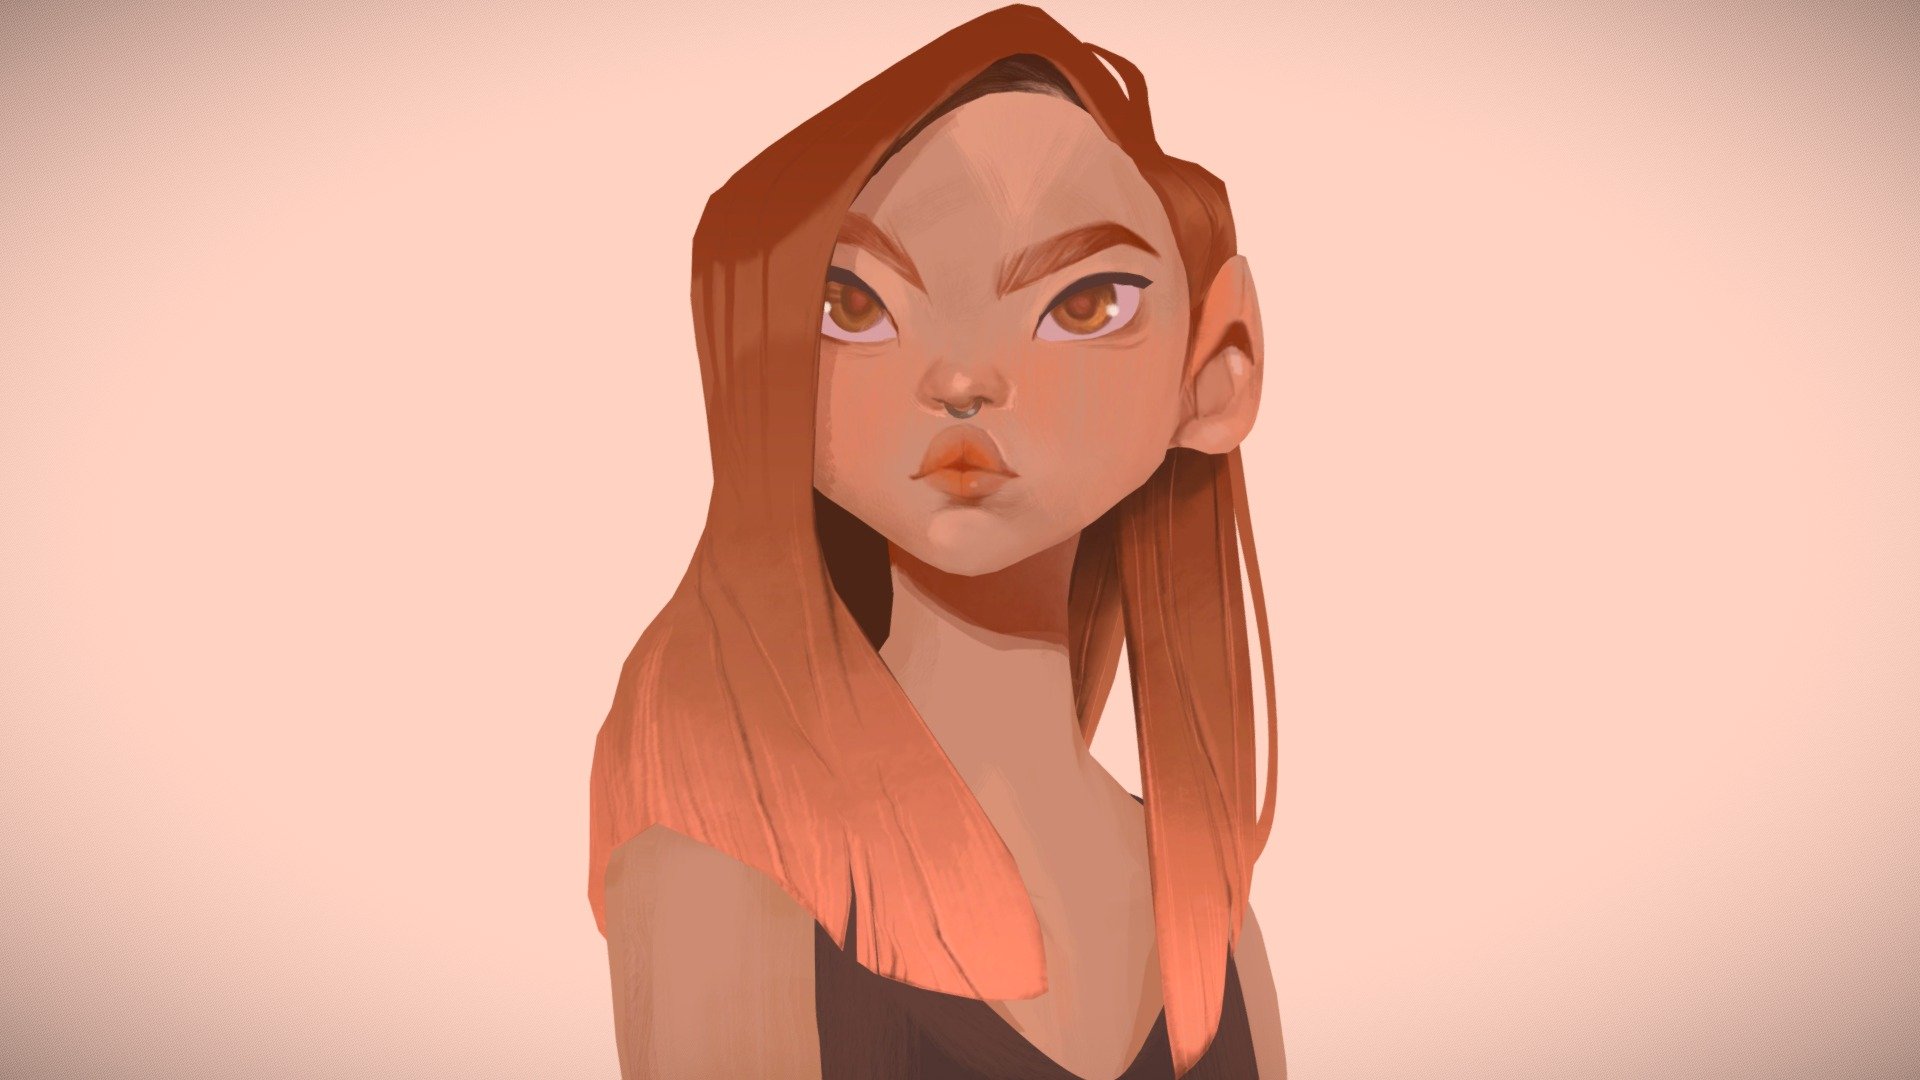 Bust sculpt and texture based on the beautiful art of Lois van Baarle:
https://www.artstation.com/artwork/2xa82v

Sculpted in ZBrush, retopped in Maya and textured in Substance Painter 3d model